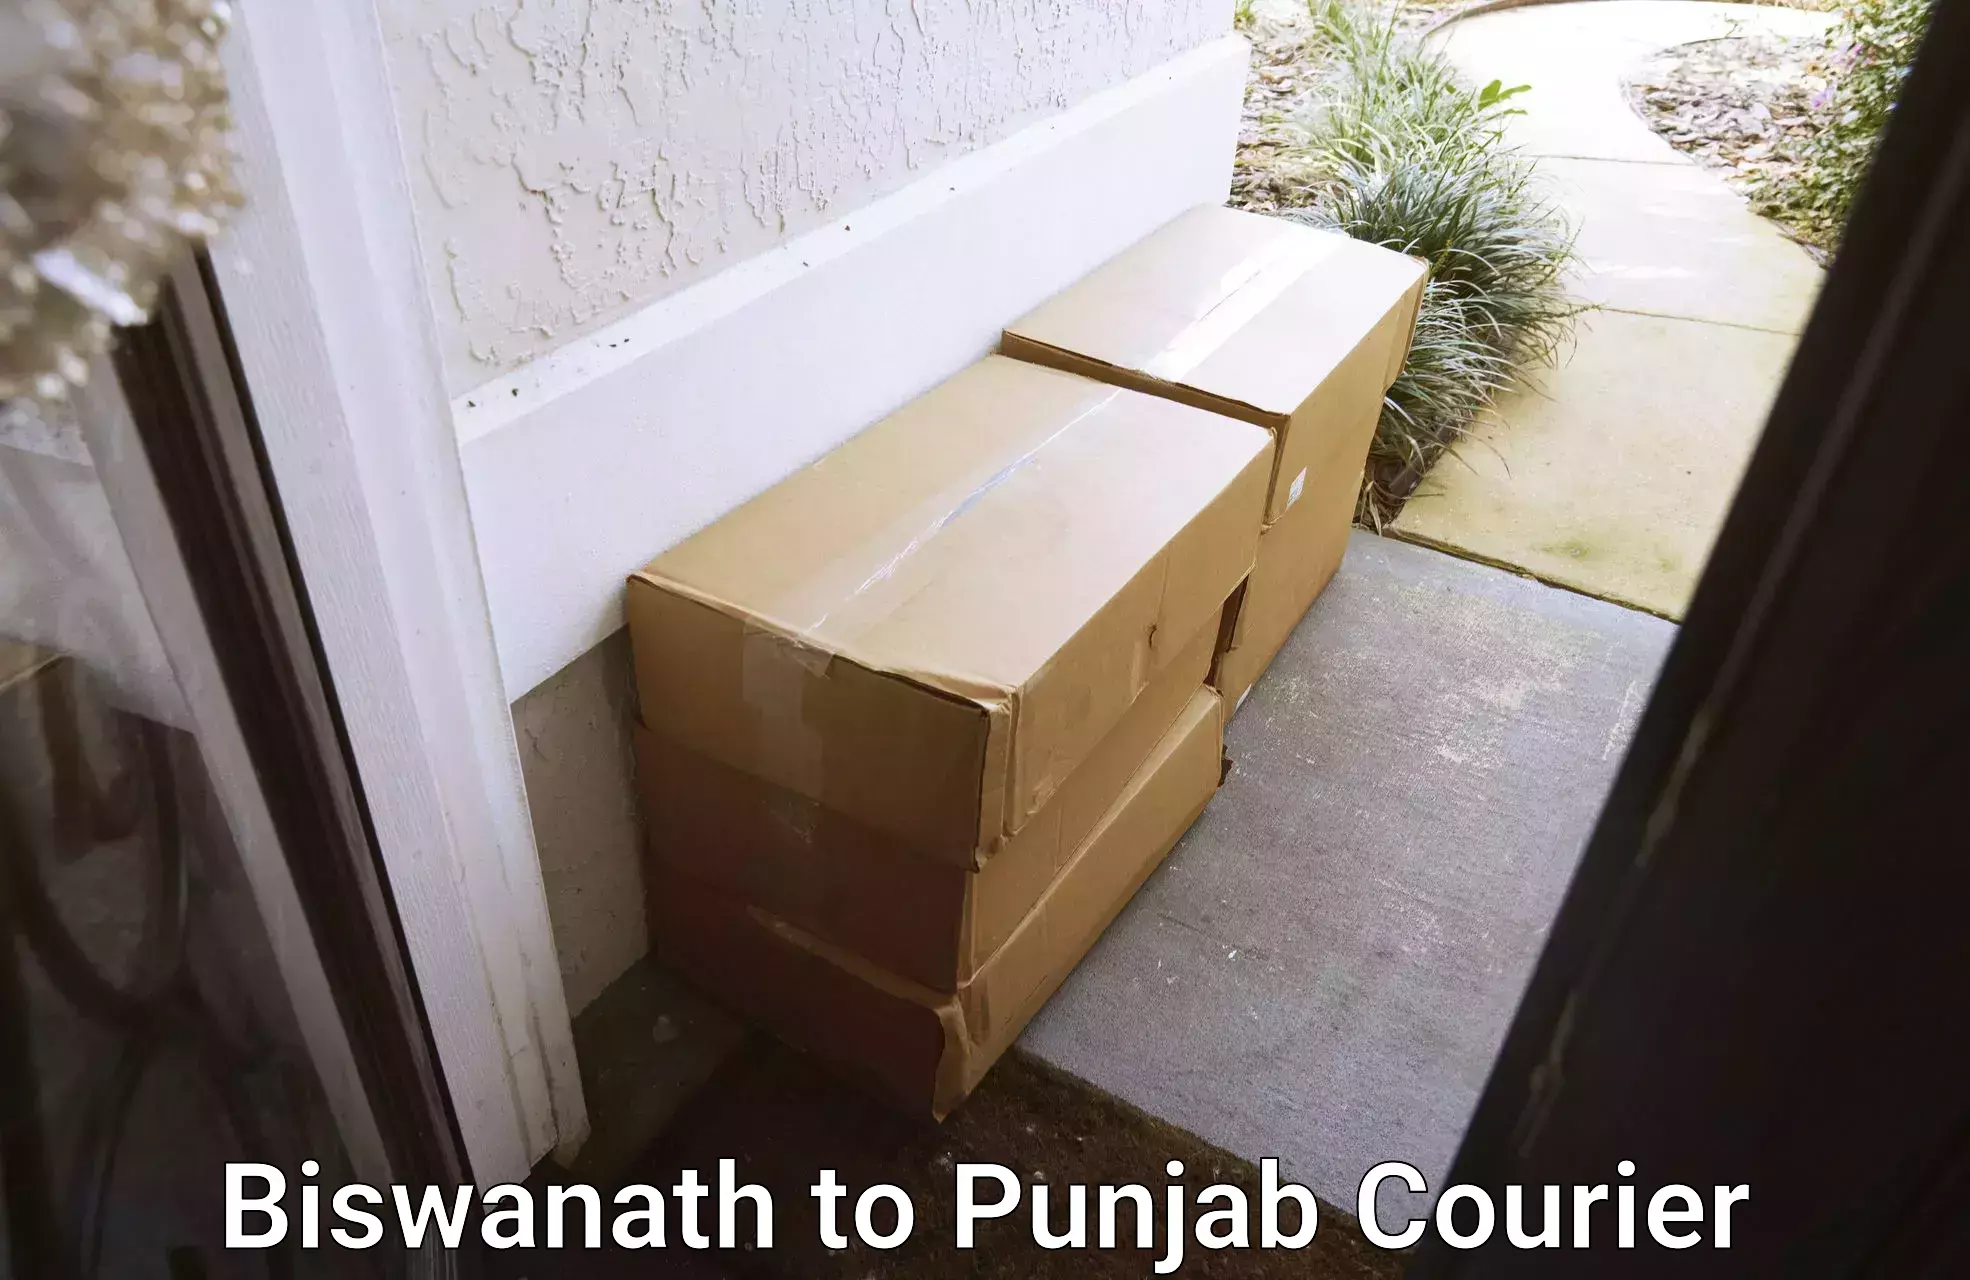 Efficient parcel tracking Biswanath to Amritsar